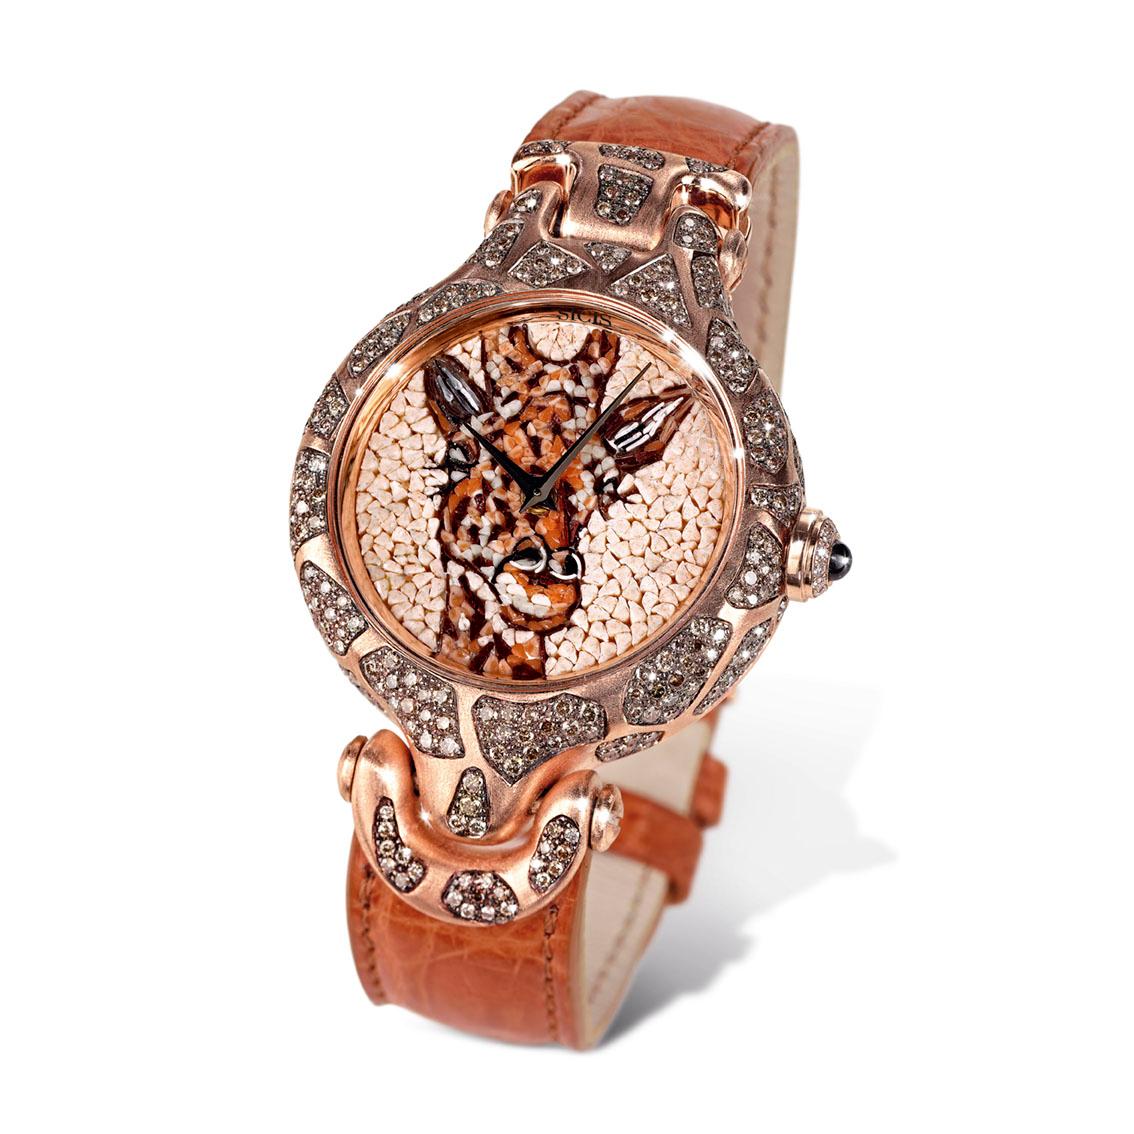 Brilliant Cut Watch Yellow Gold White and Brown Diamonds Sapphires Alligator Strap Micromosaic For Sale